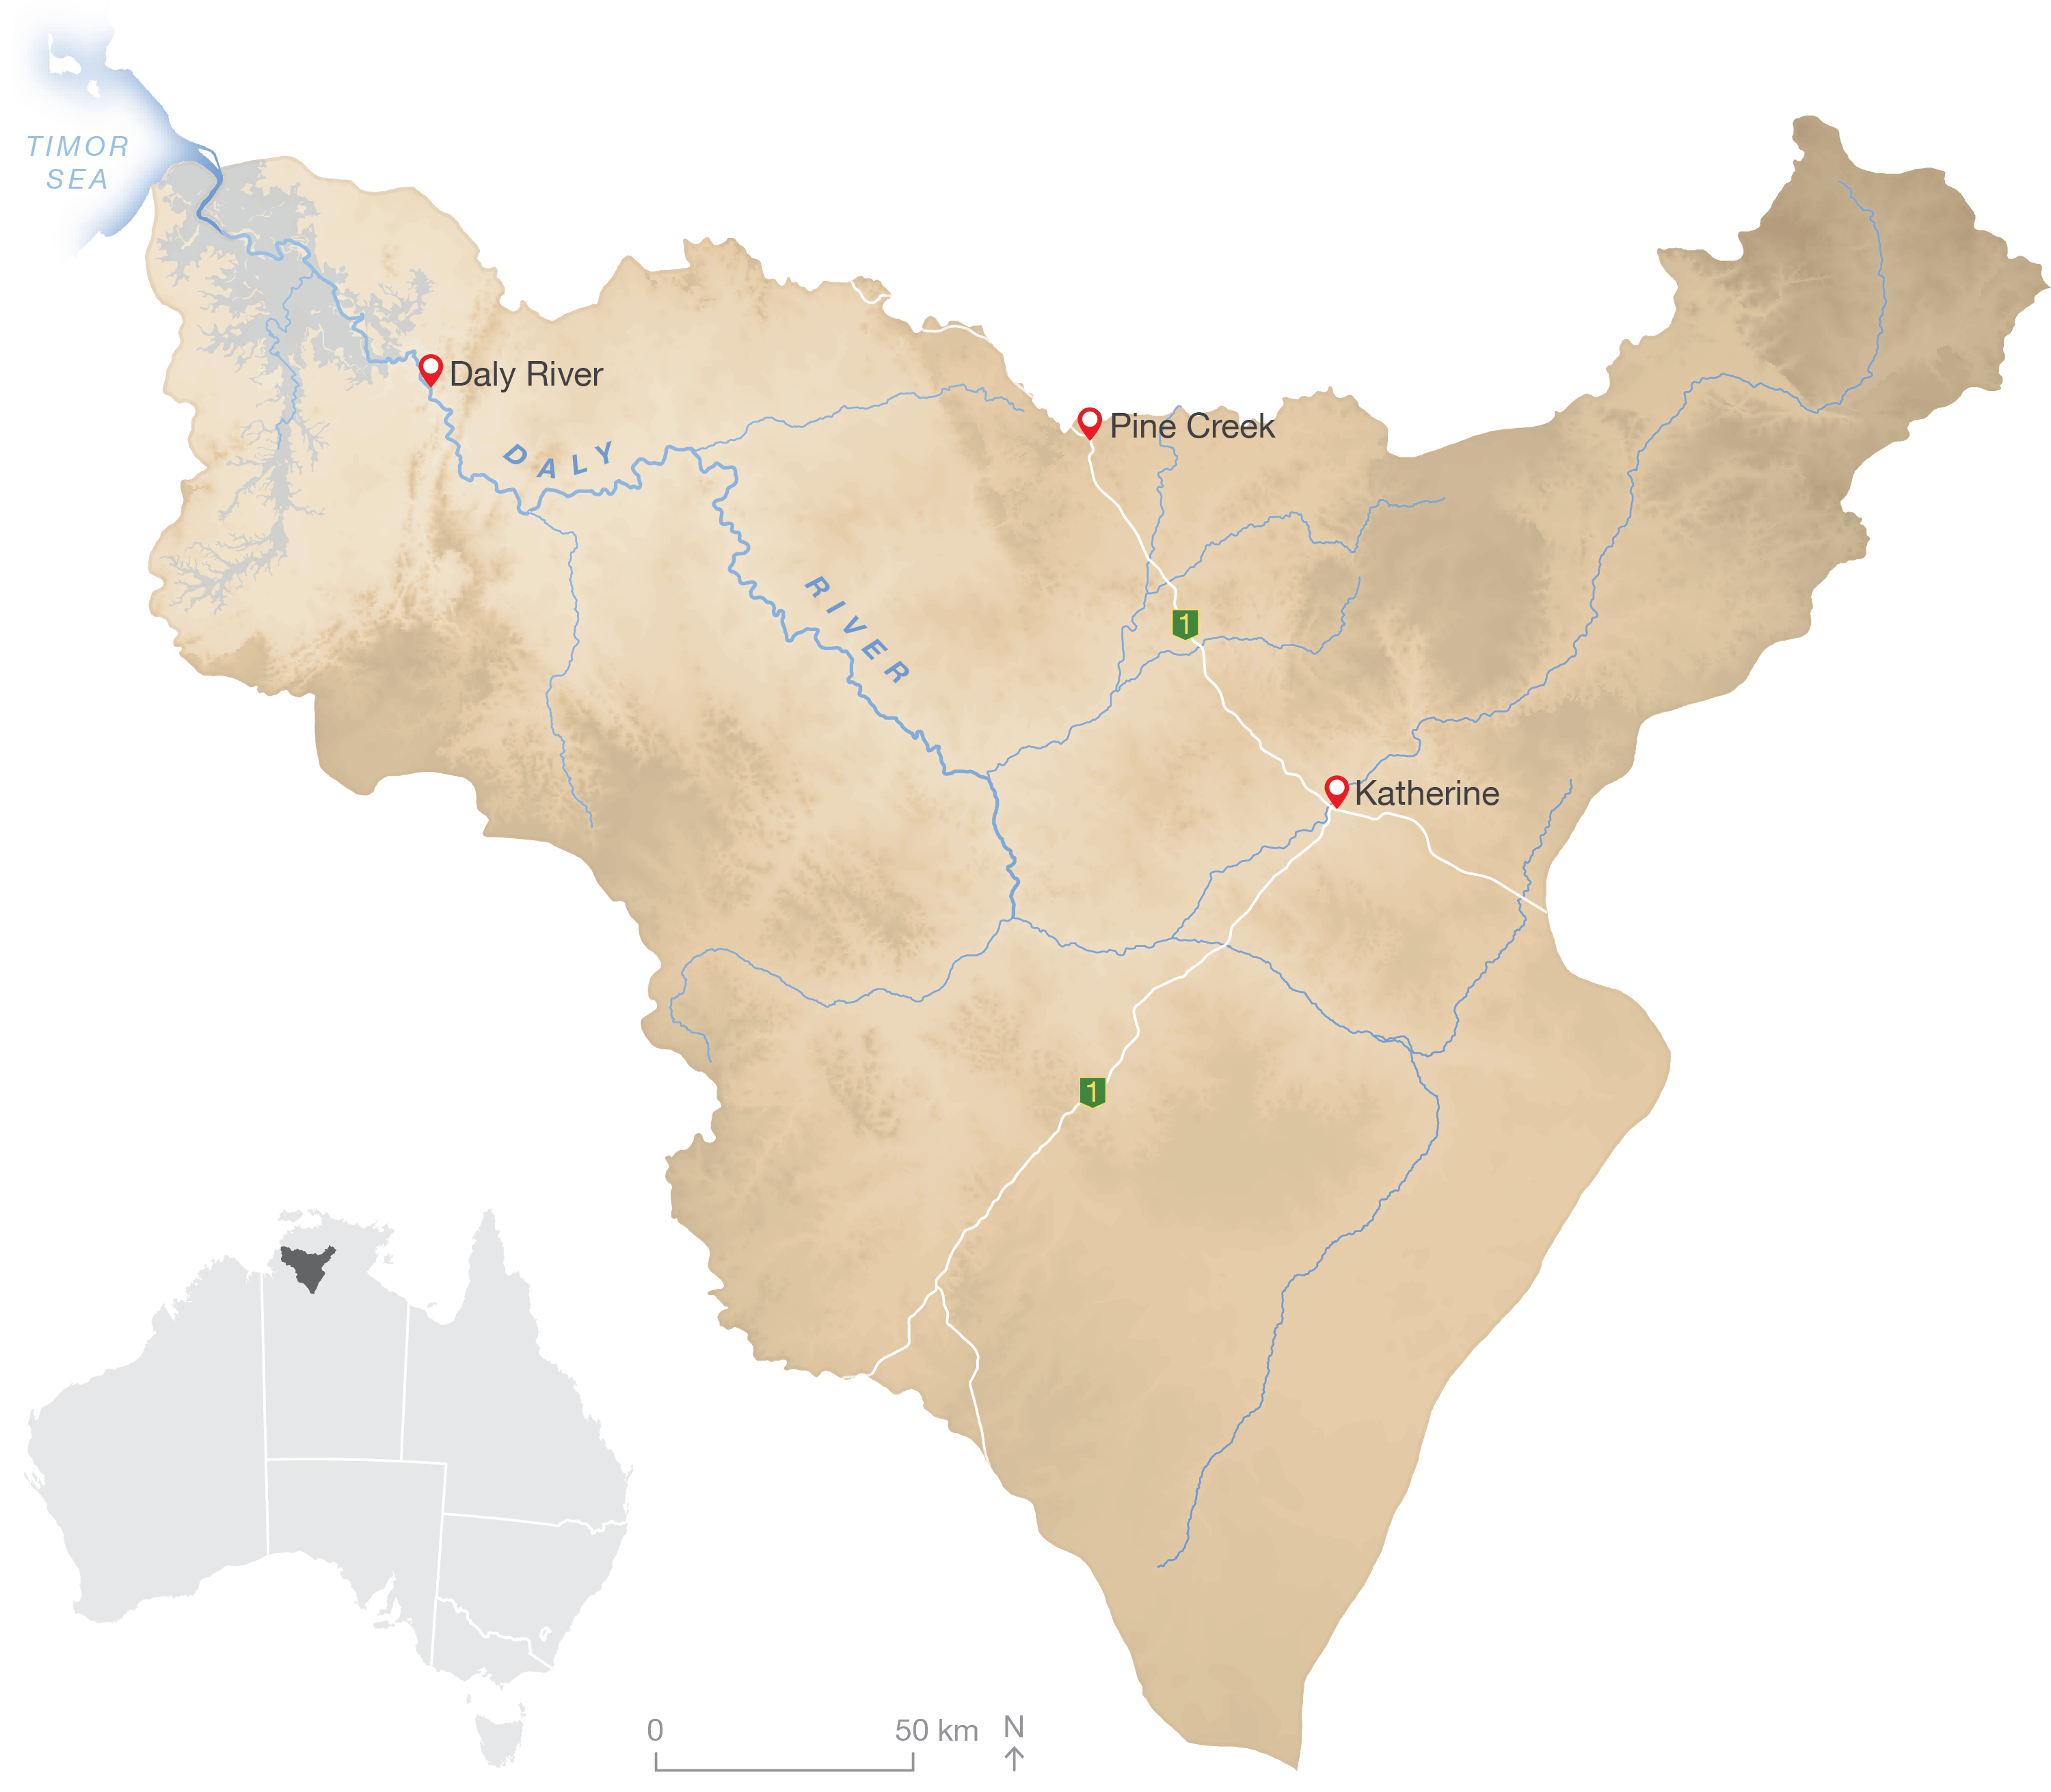 Map of the Daly River catchment and a smaller locator of the catchment within Australia in the bottom left.